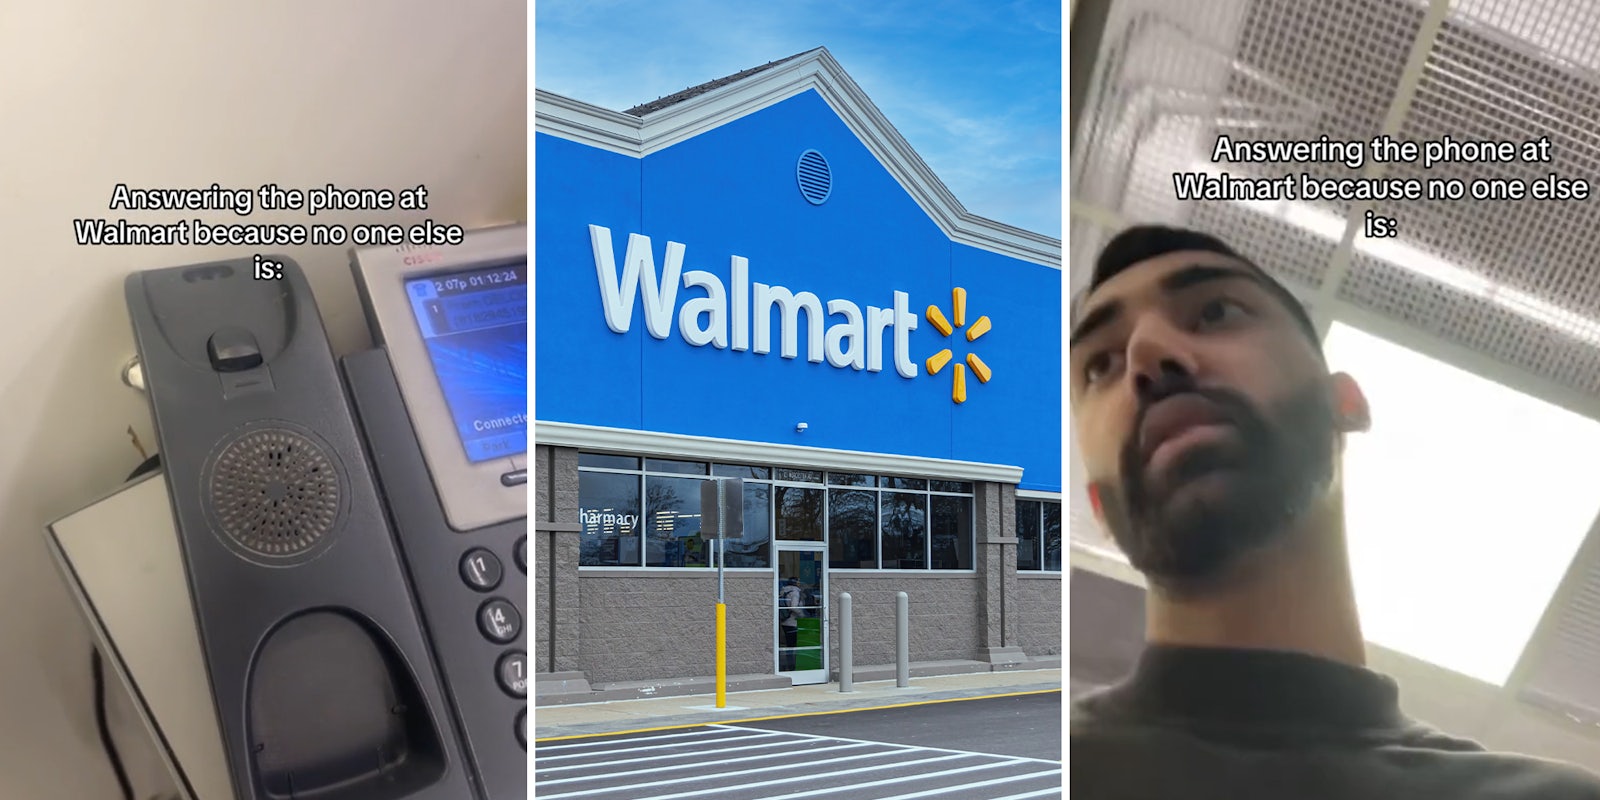 Customer answers phone at Walmart since no workers are around to